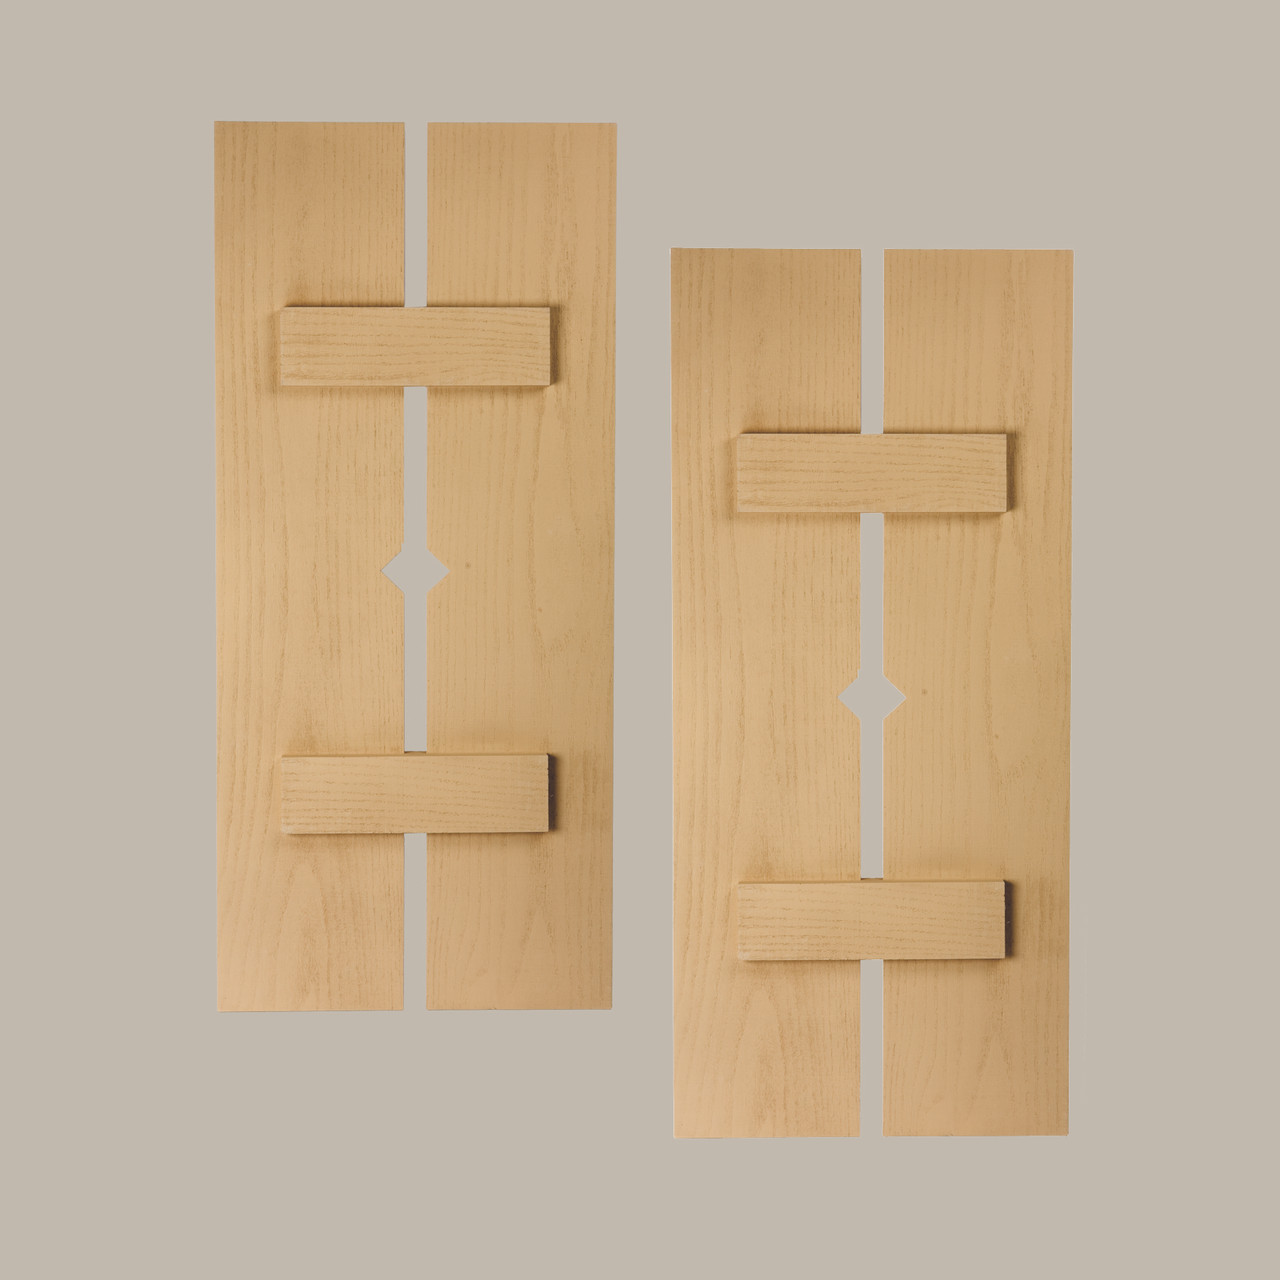 12 inch by 45 inch Plank Shutter with 2-Plank, Diamond